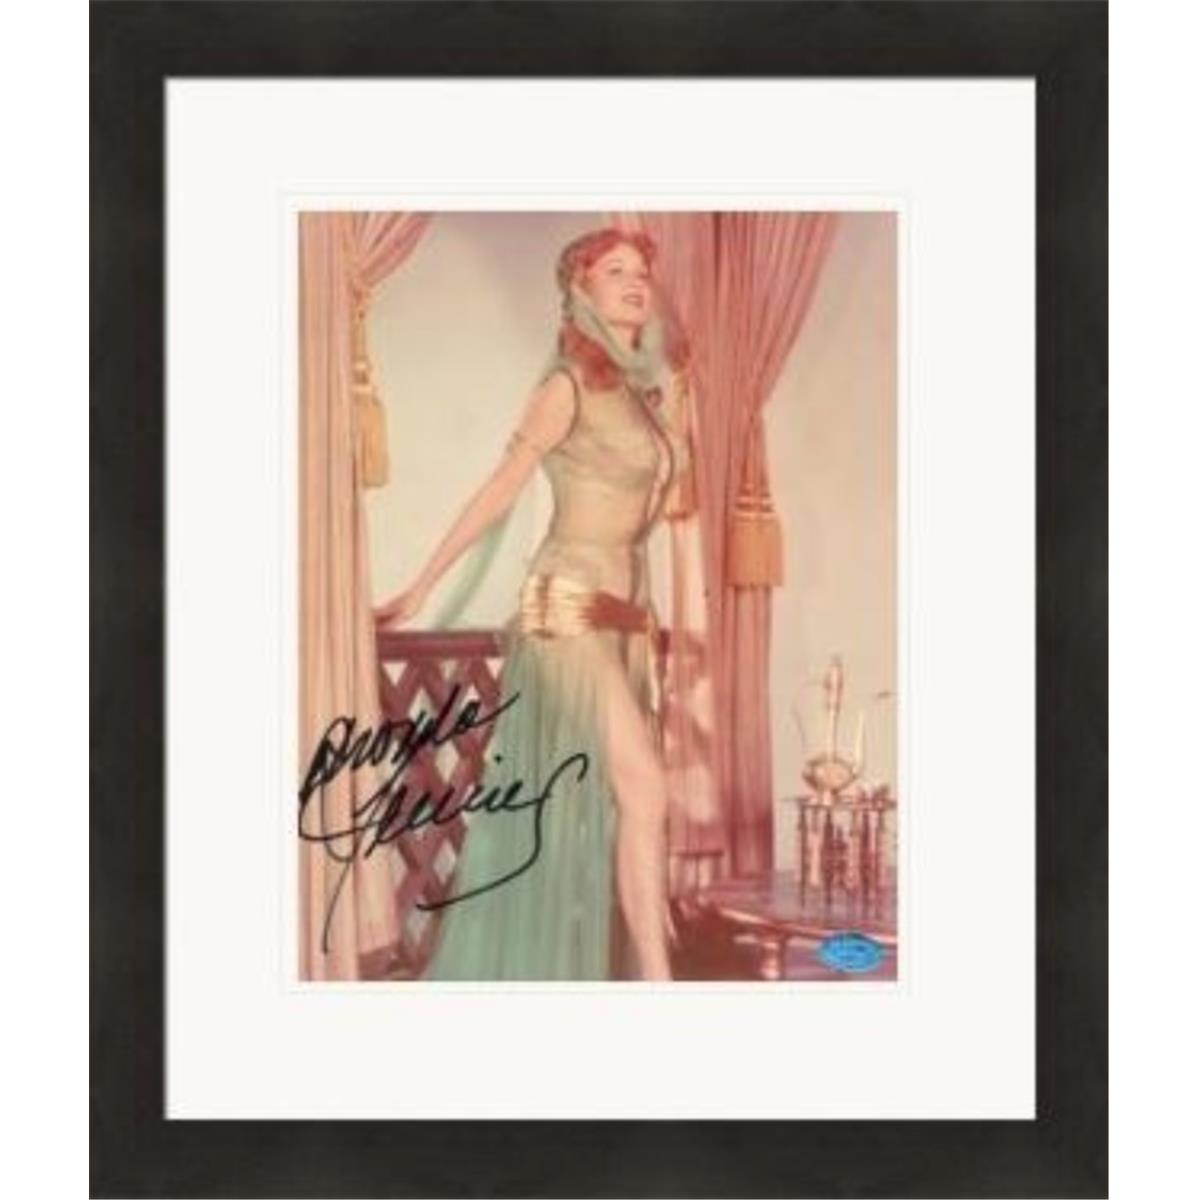 465103 8 x 10 in. Actress No. 2 Matted & Framed Rhonda Fleming Autographed Photo -  Autograph Warehouse